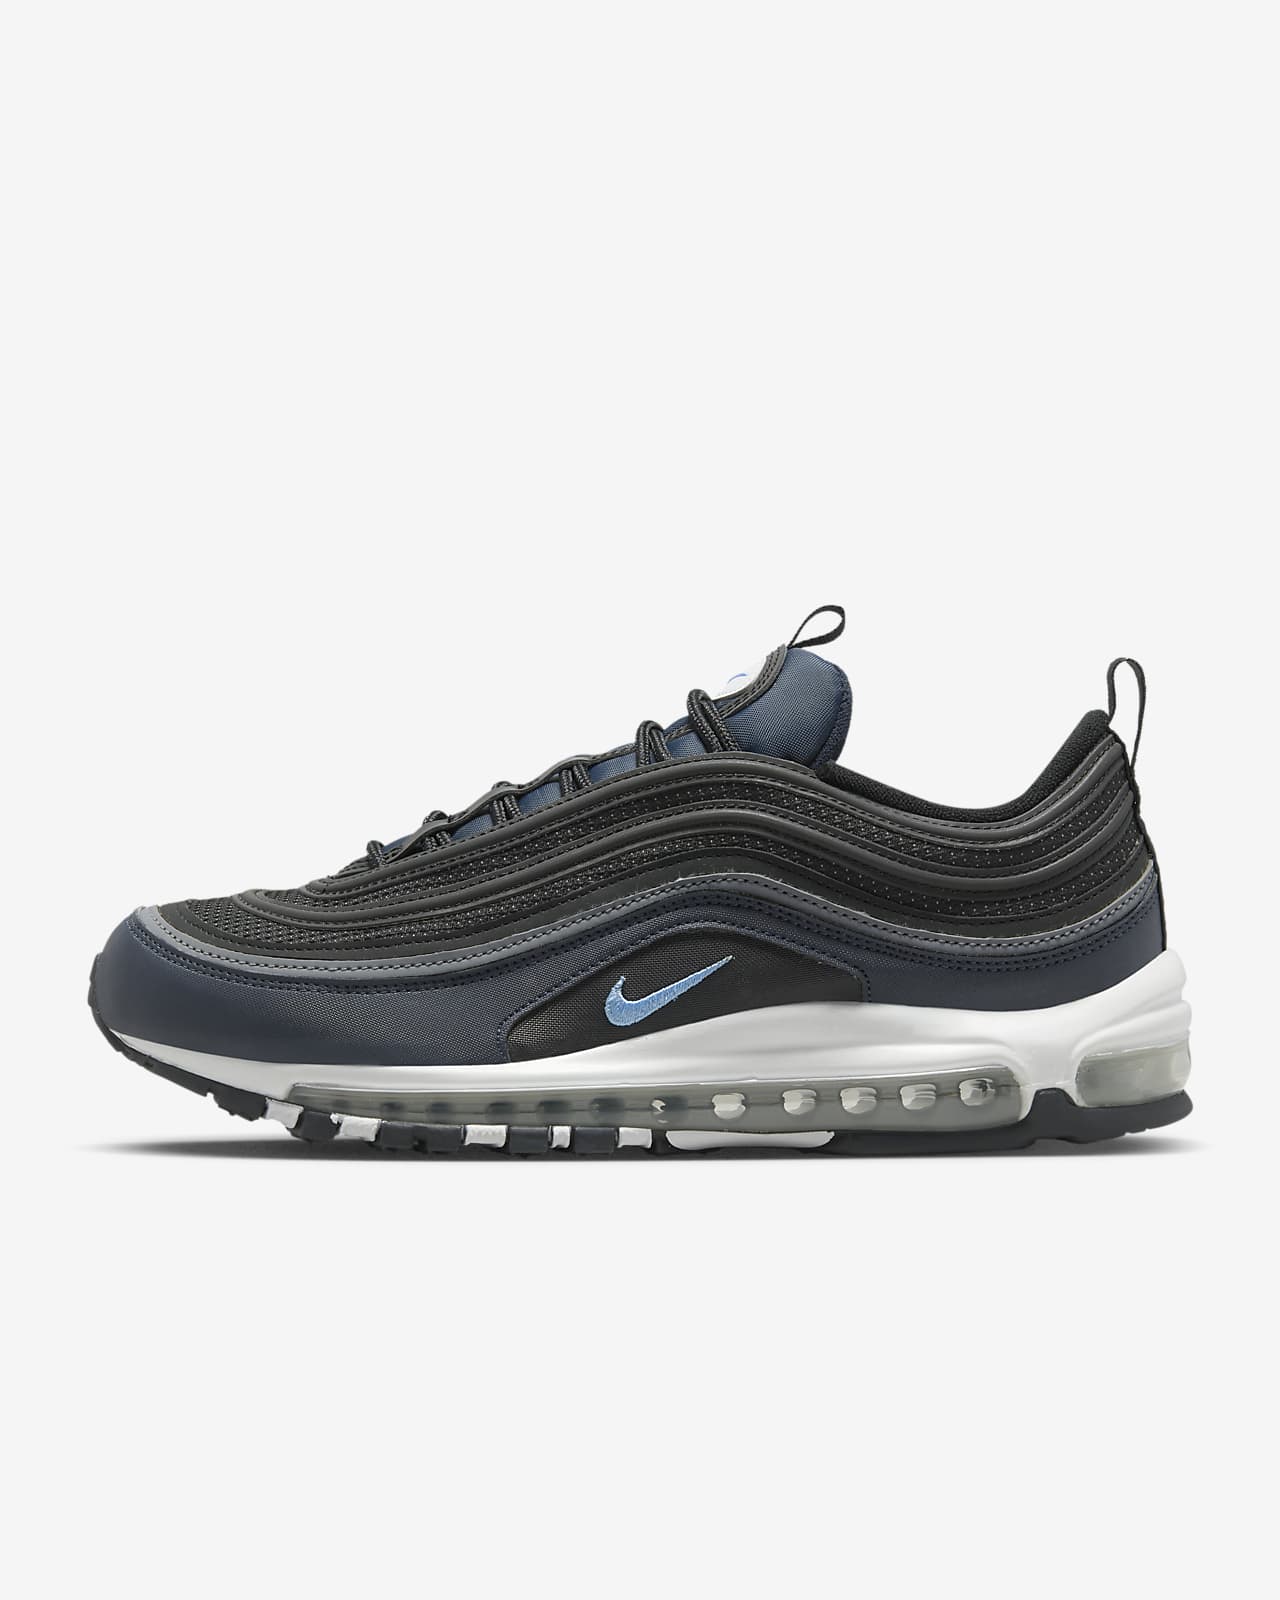 among Contain climate Nike Air Max 97 Men's Shoes. Nike.com